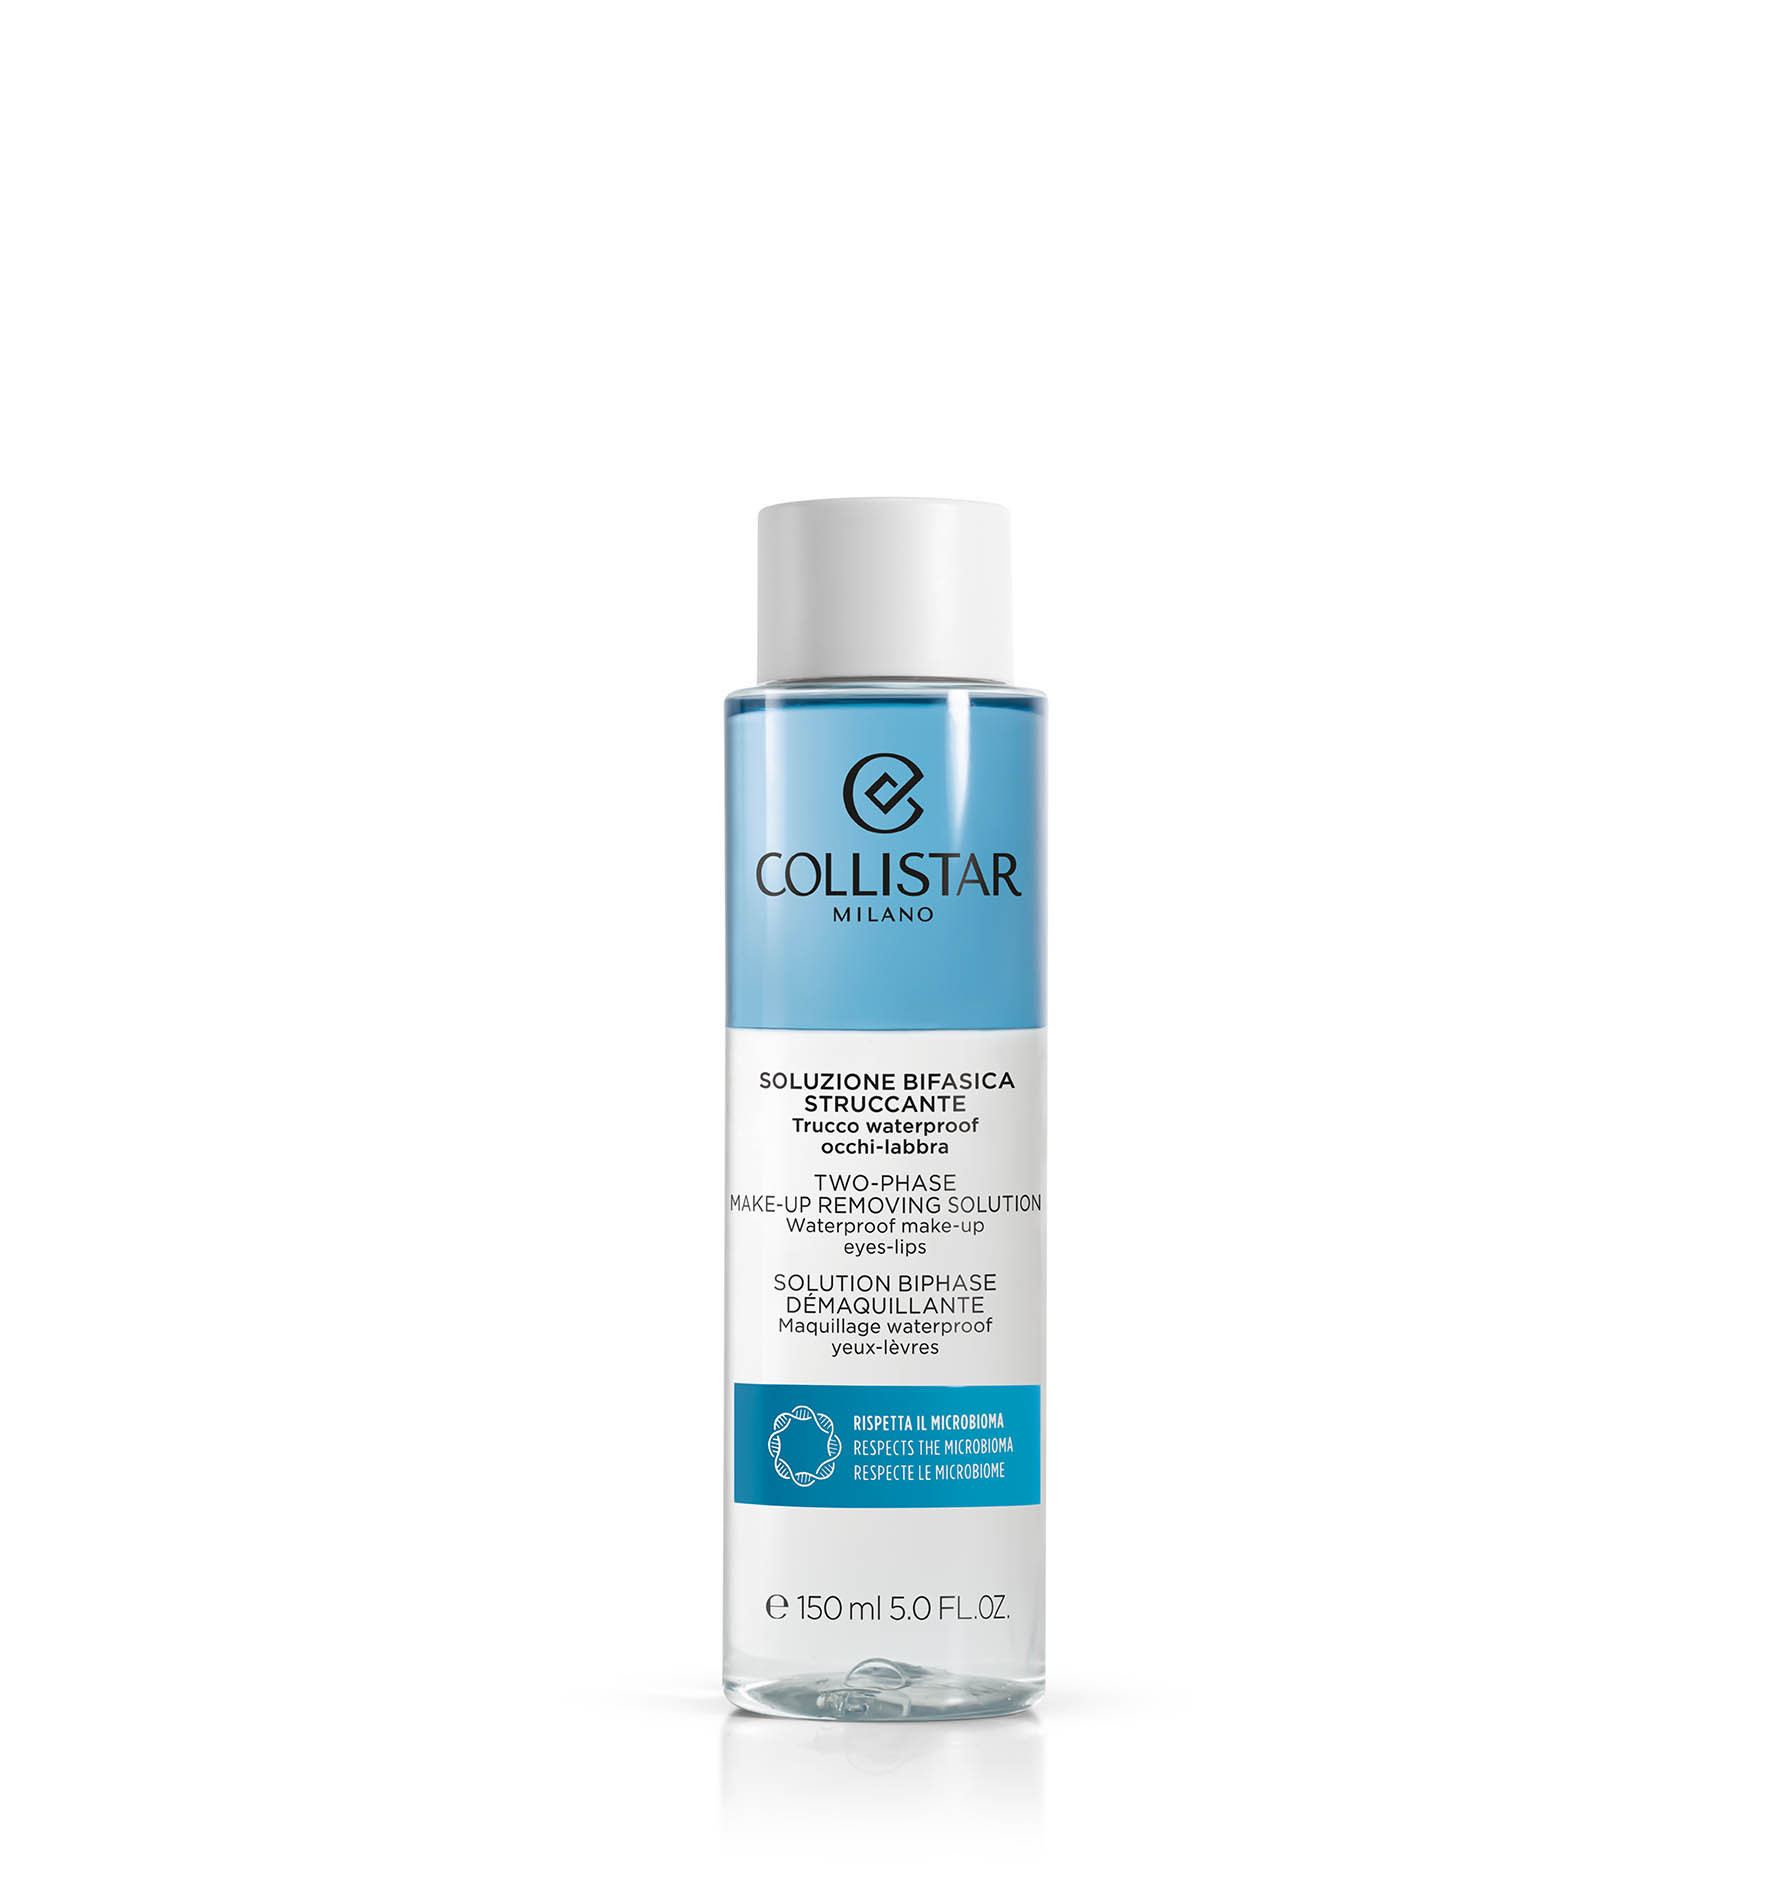 TWO-PHASE MAKE-UP REMOVING SOLUTION - Cleansing | Collistar - Shop Online Ufficiale